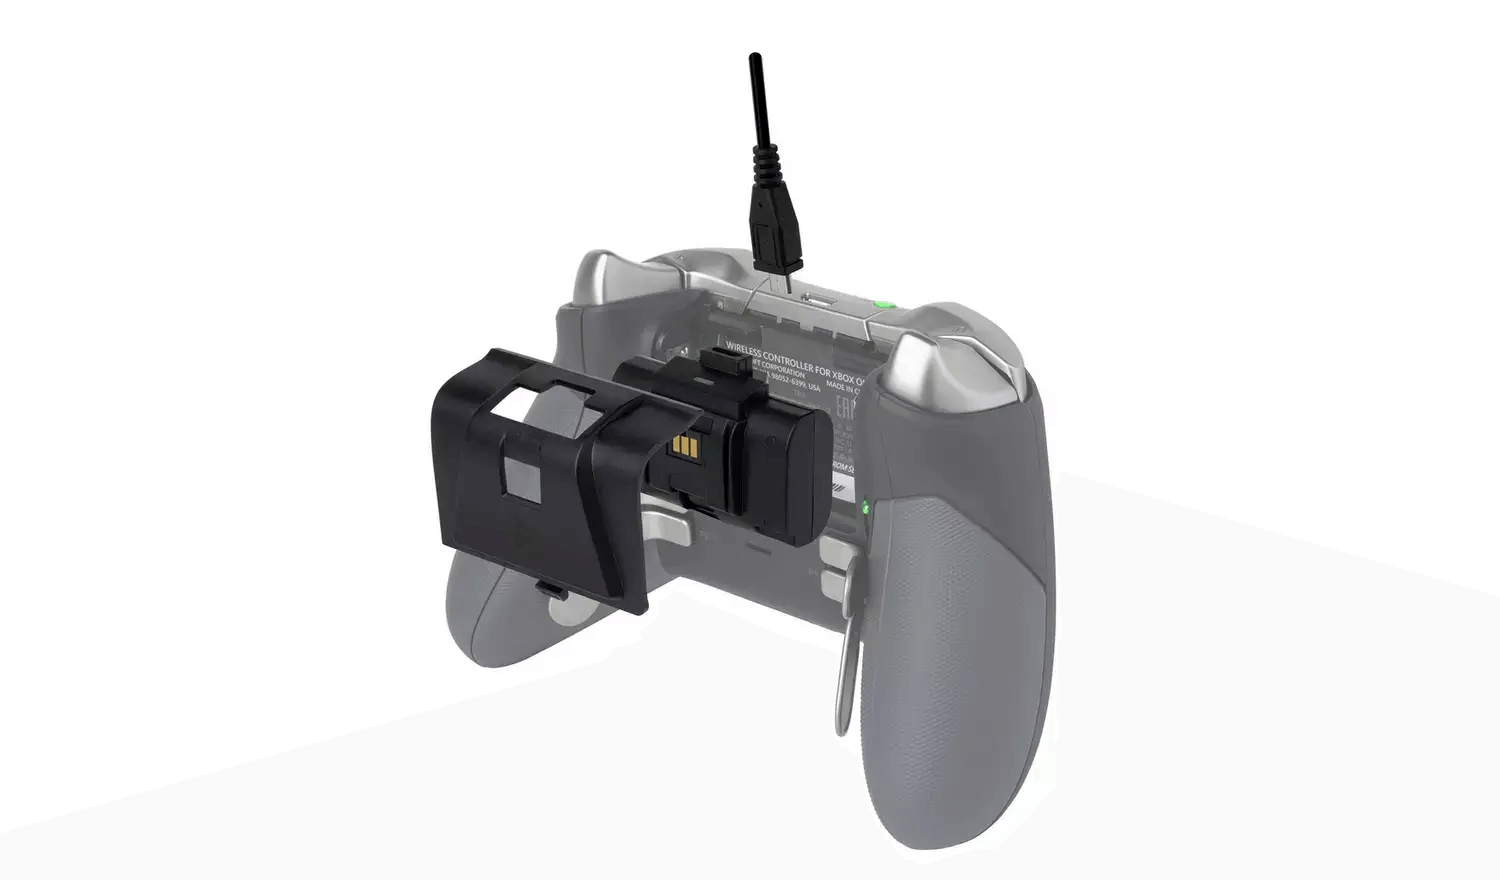 Play and Charge kit for Xbox Series X